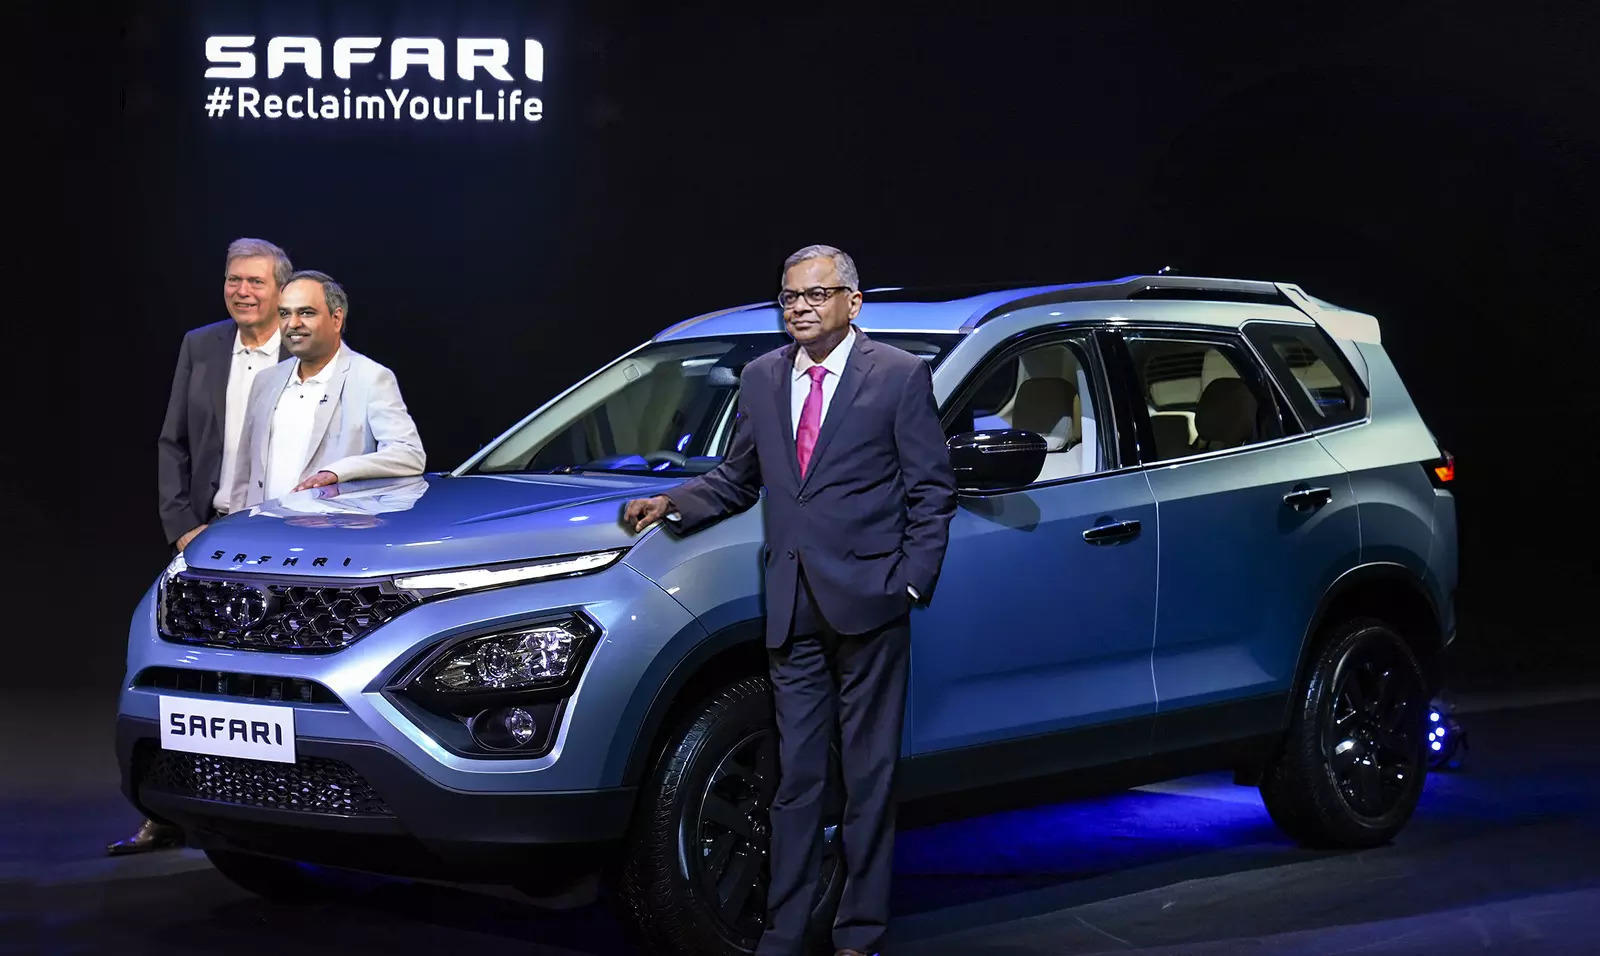 Attractive design and high-safety quotient in Tata cars has allowed the company to outpace the market, claimed the company.